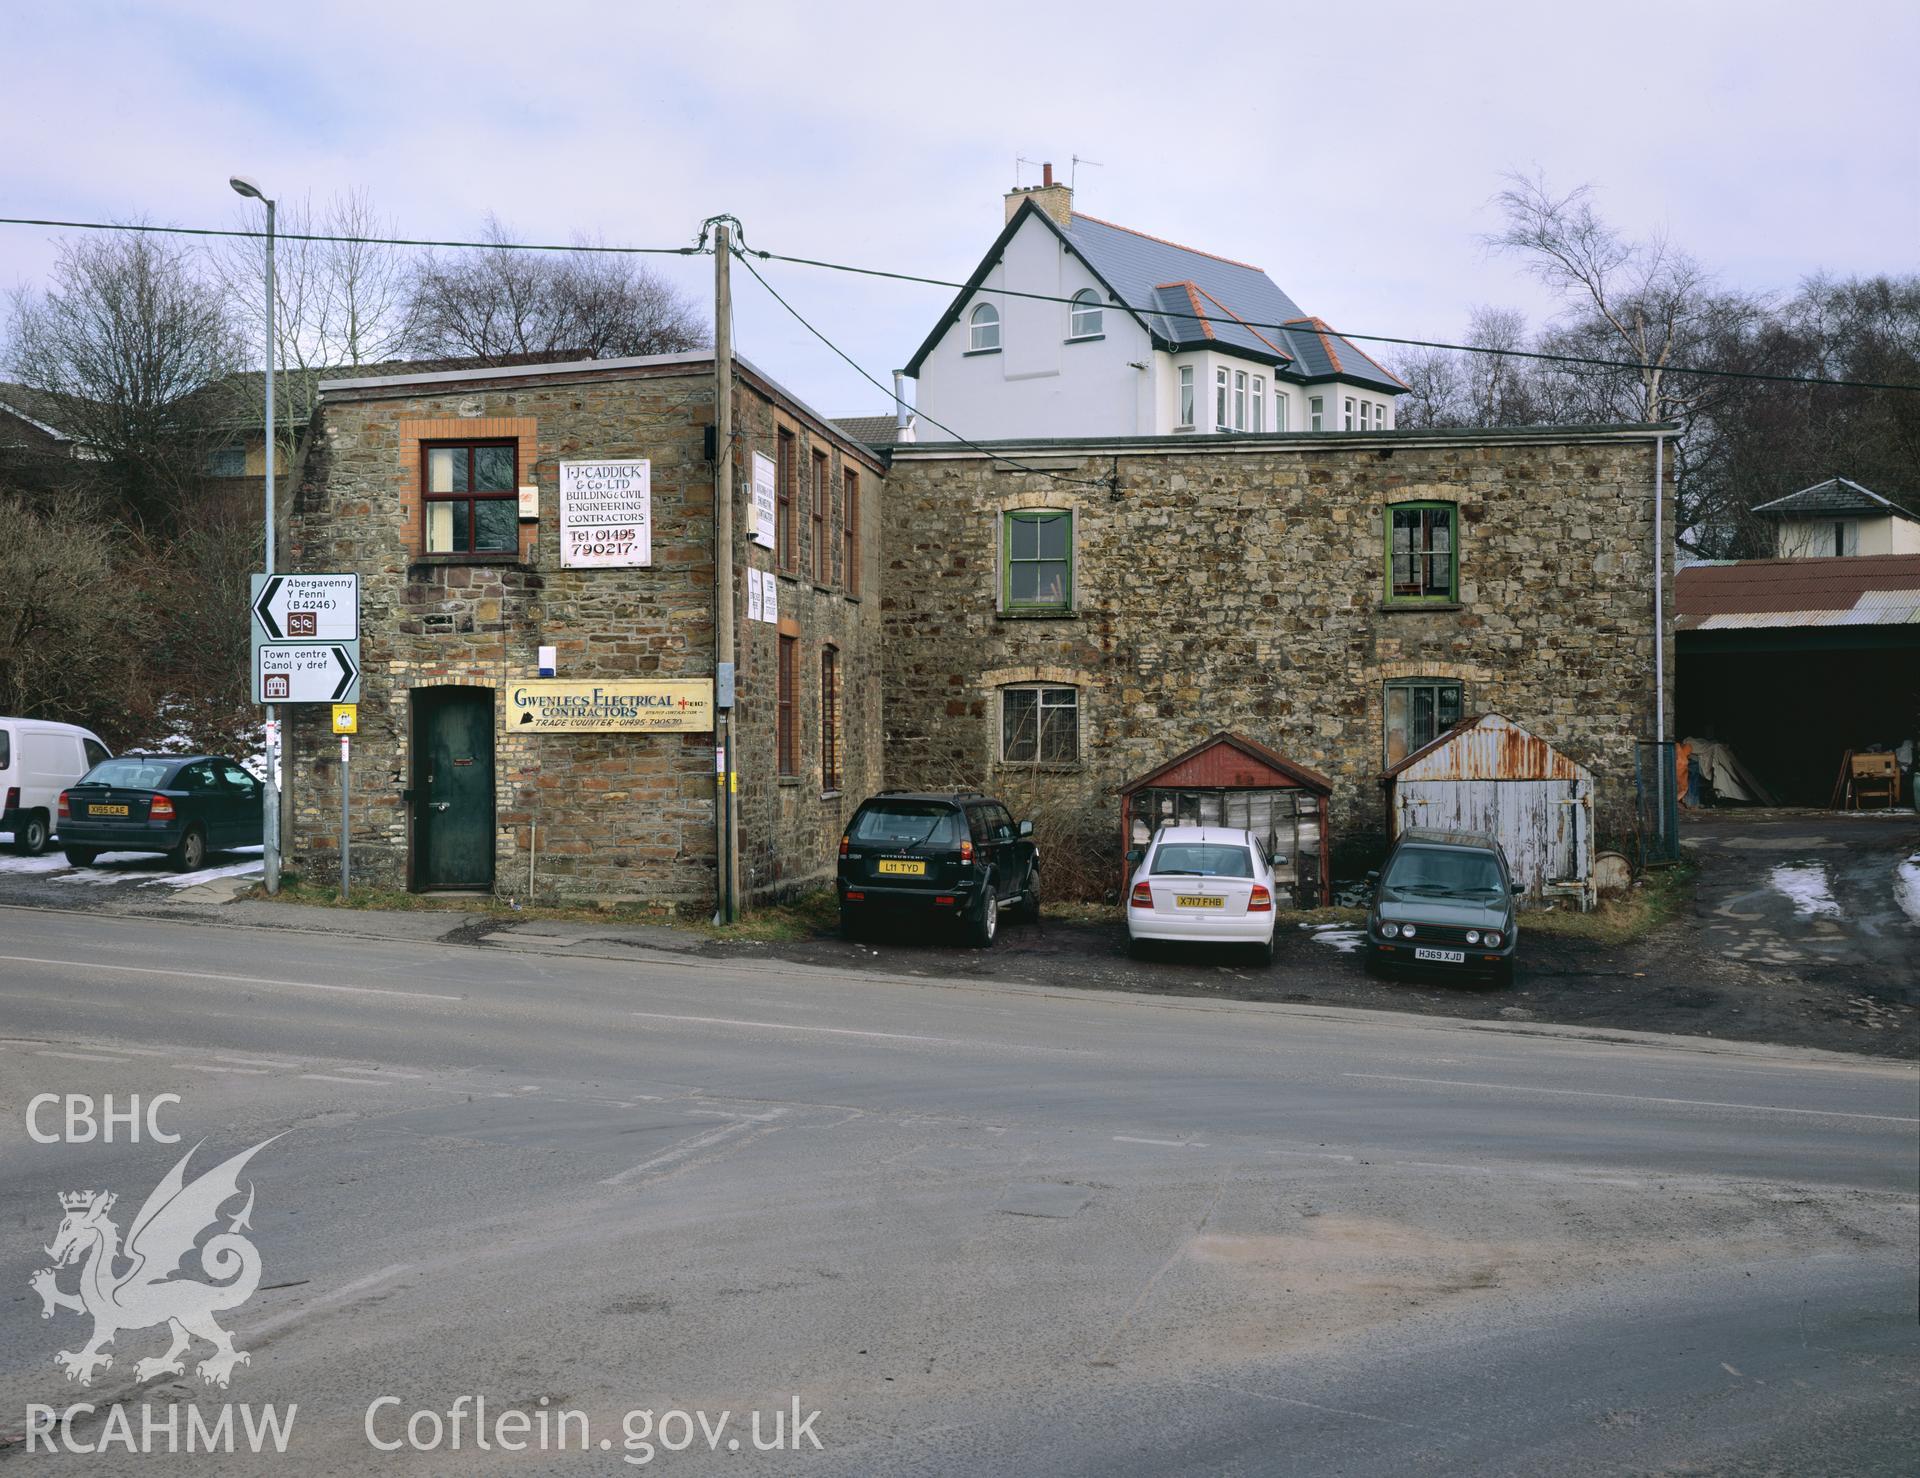 RCAHMW colour transparency showing an exterior view of Company Shop, North Street, Blaenavon, taken by Iain Wright, March 2004.